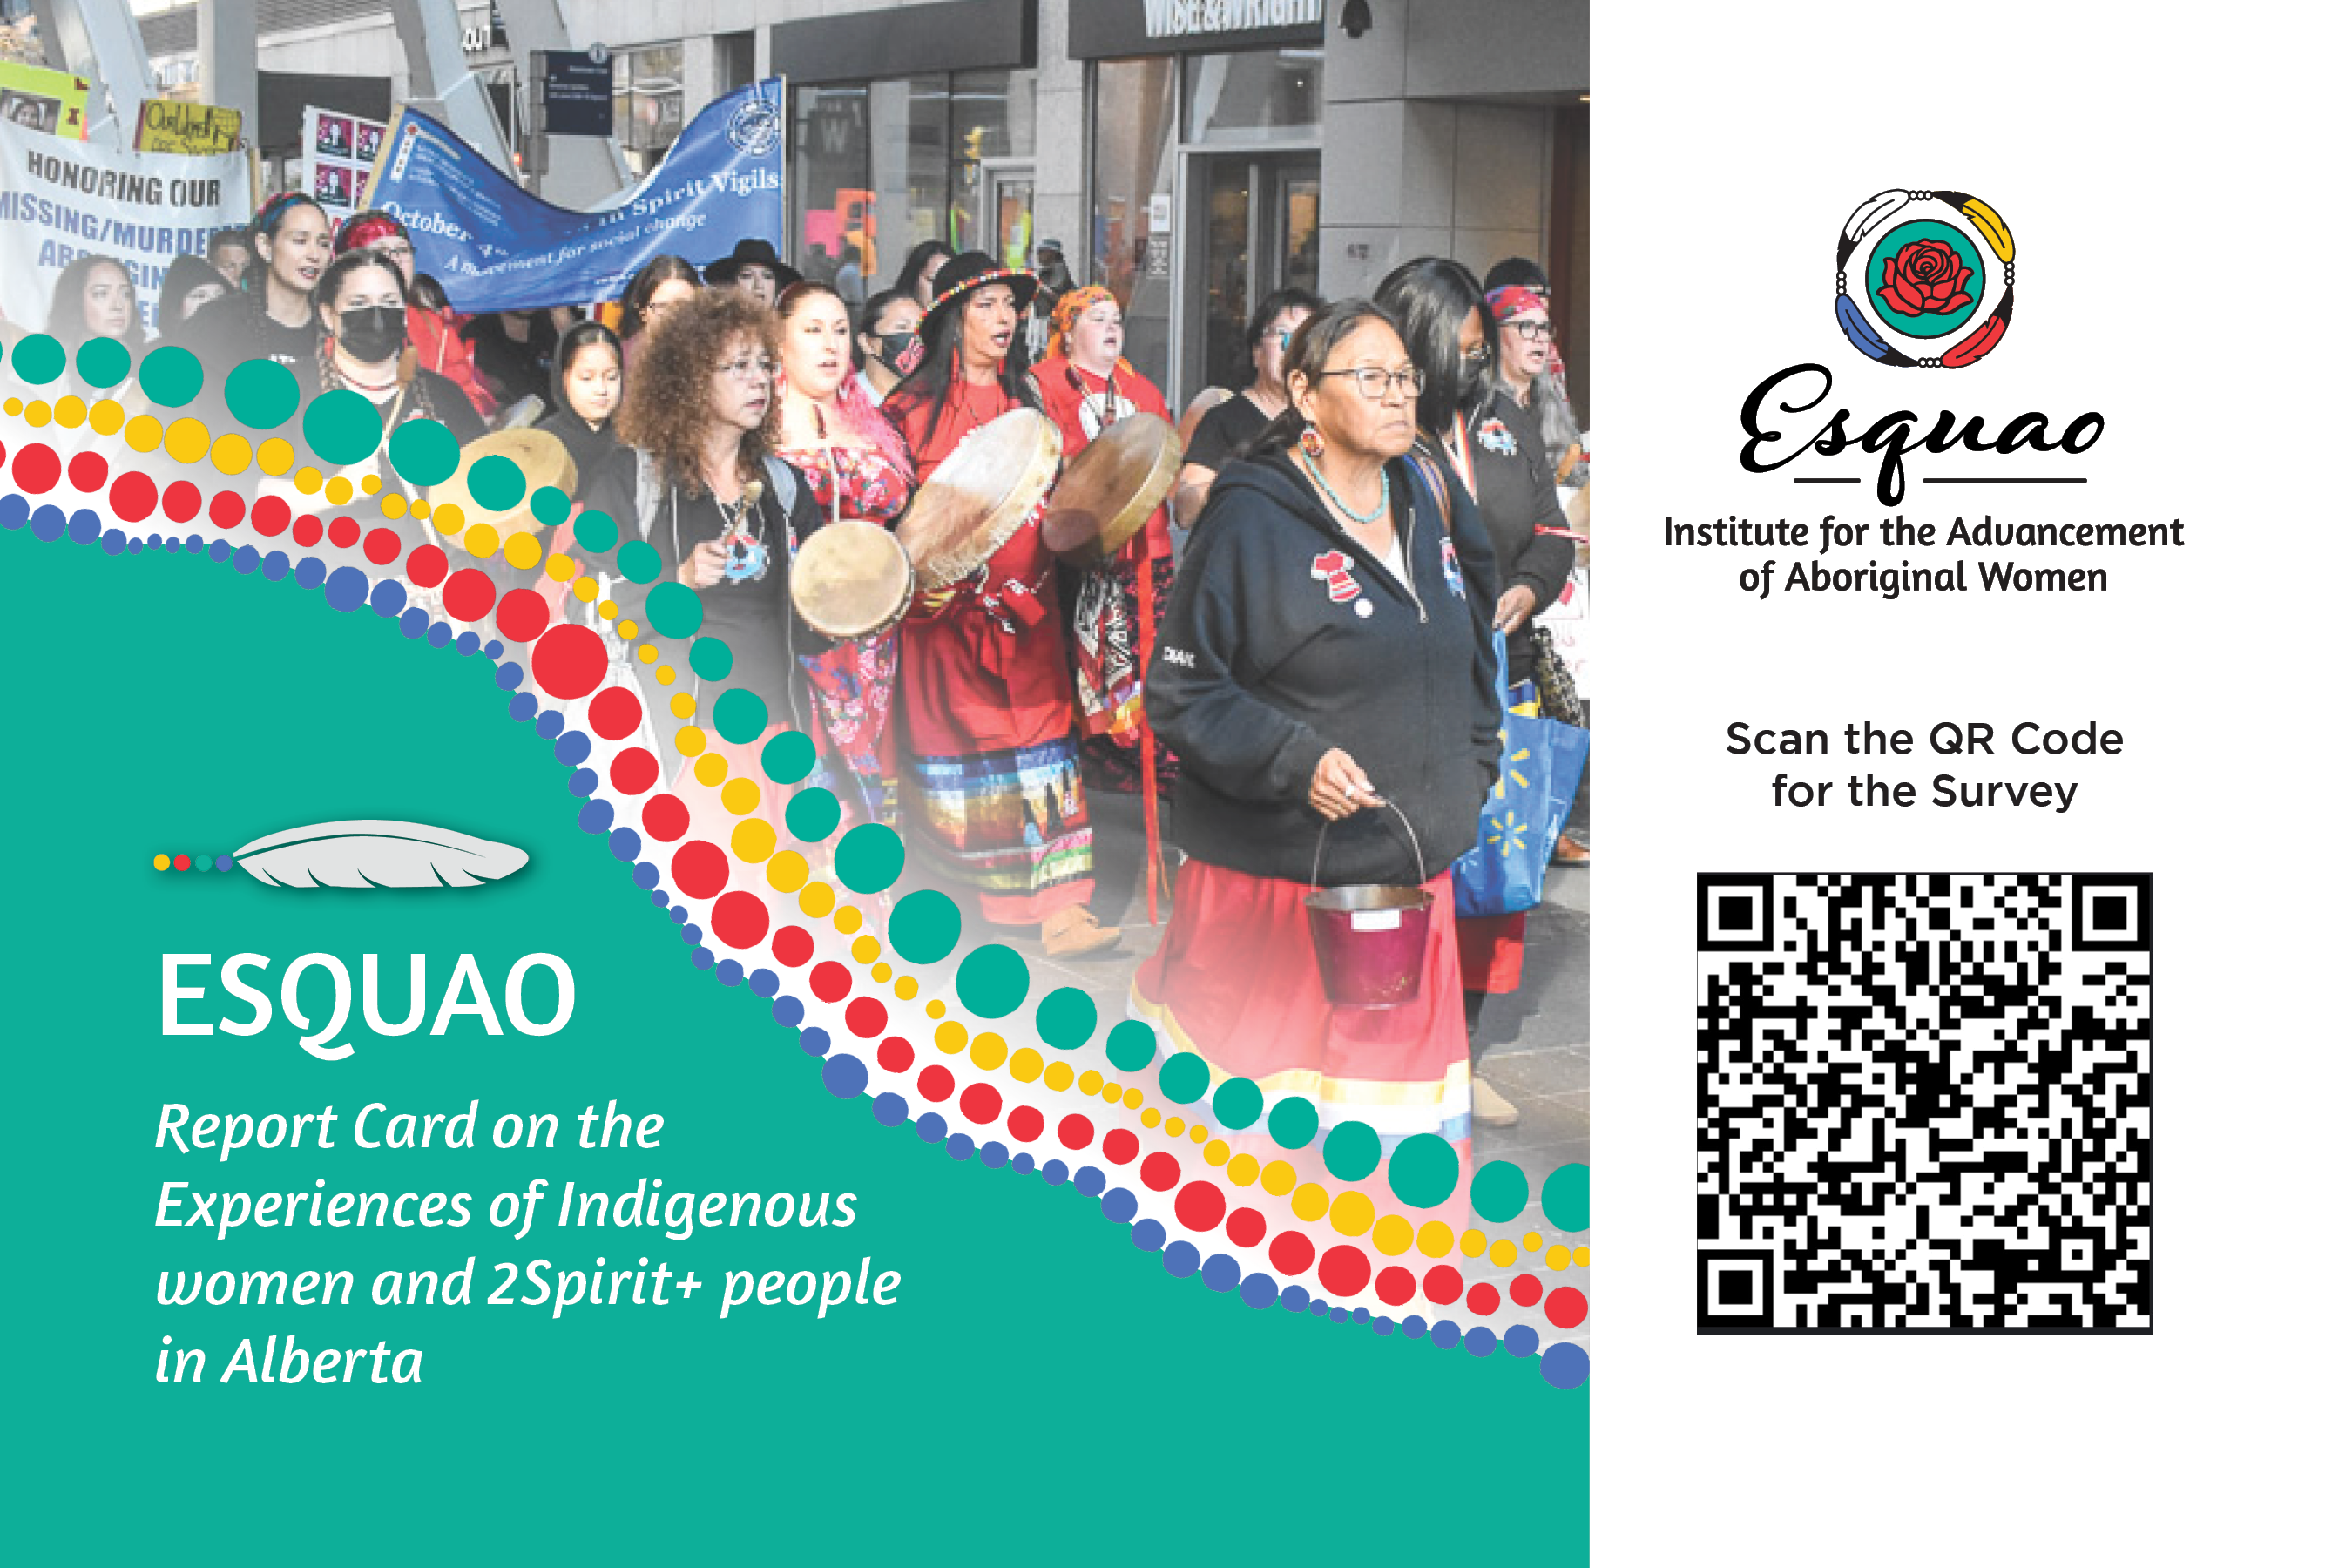 Esquao Report Card on the Experience of Indigenous women and 2Spirit+ people in Alberta